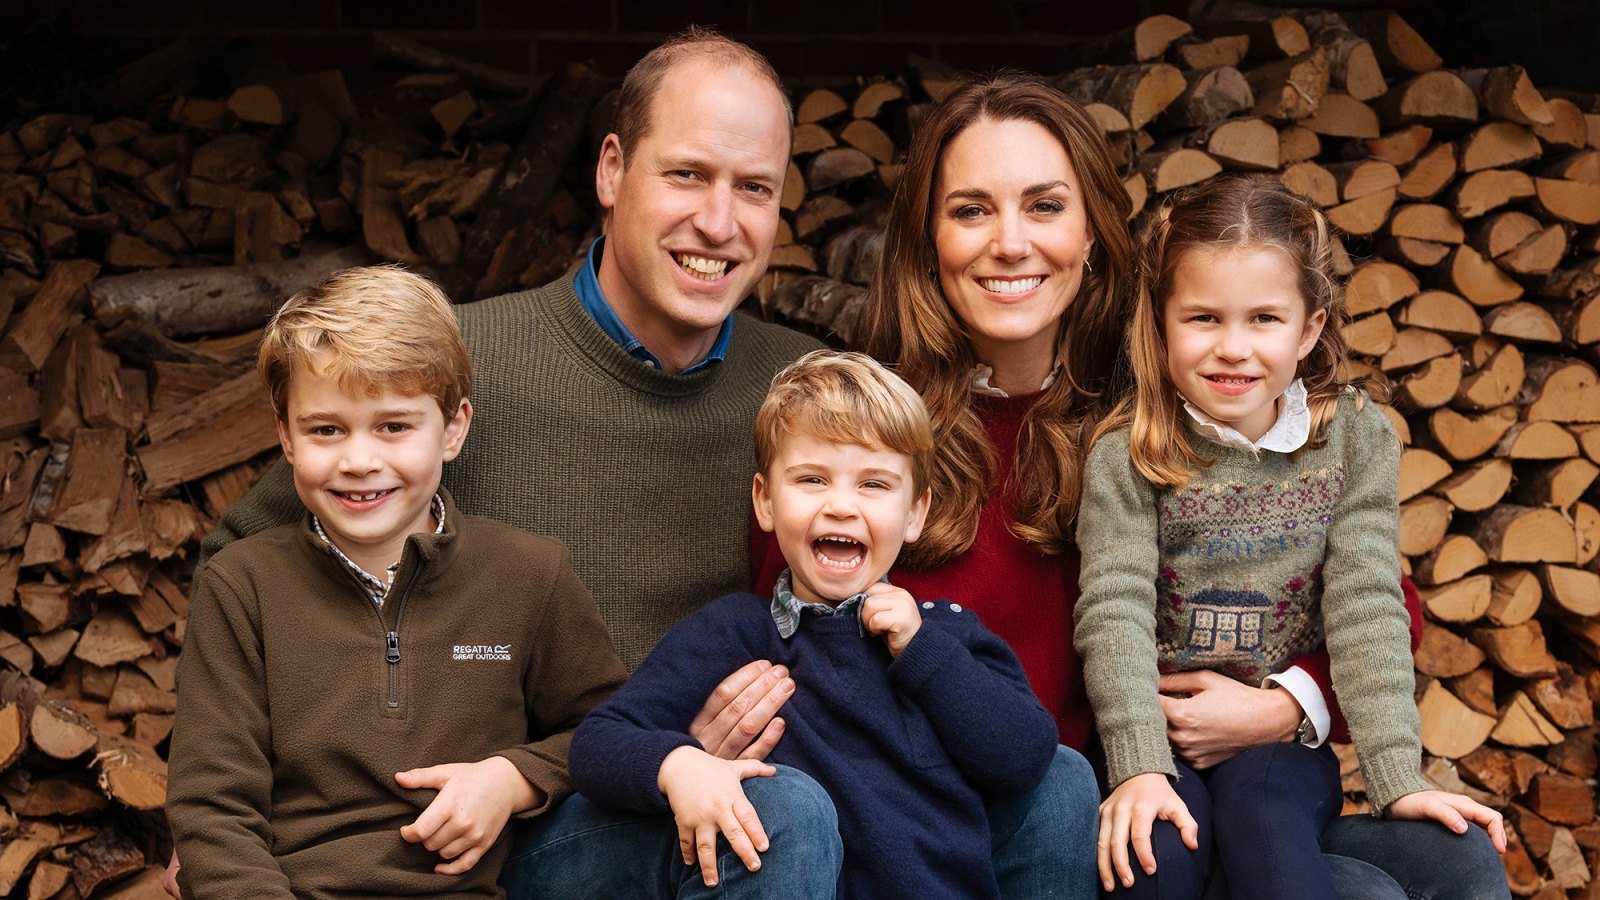 Prince William and Princess Kate’s 3 Children Have New Royal Titles After King Charles III's Accession